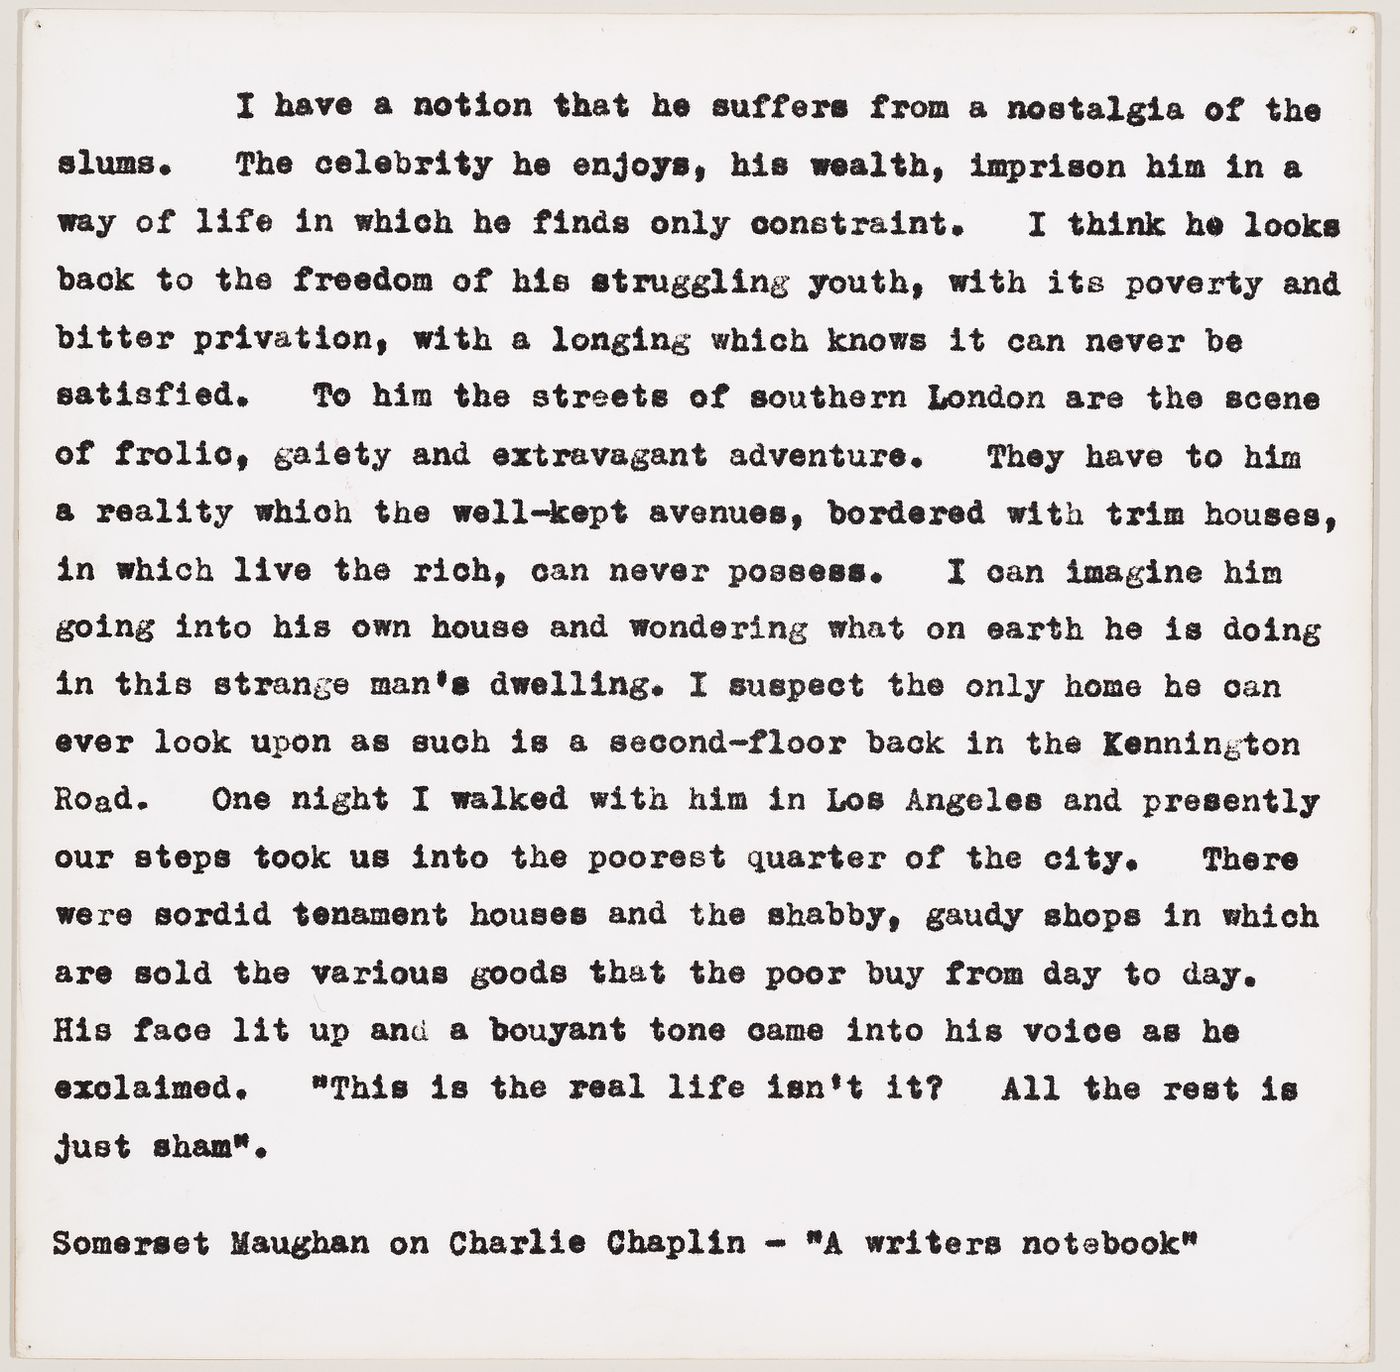 Photograph of a typescript text by W. Somerset Maugham on Charlie Chaplin